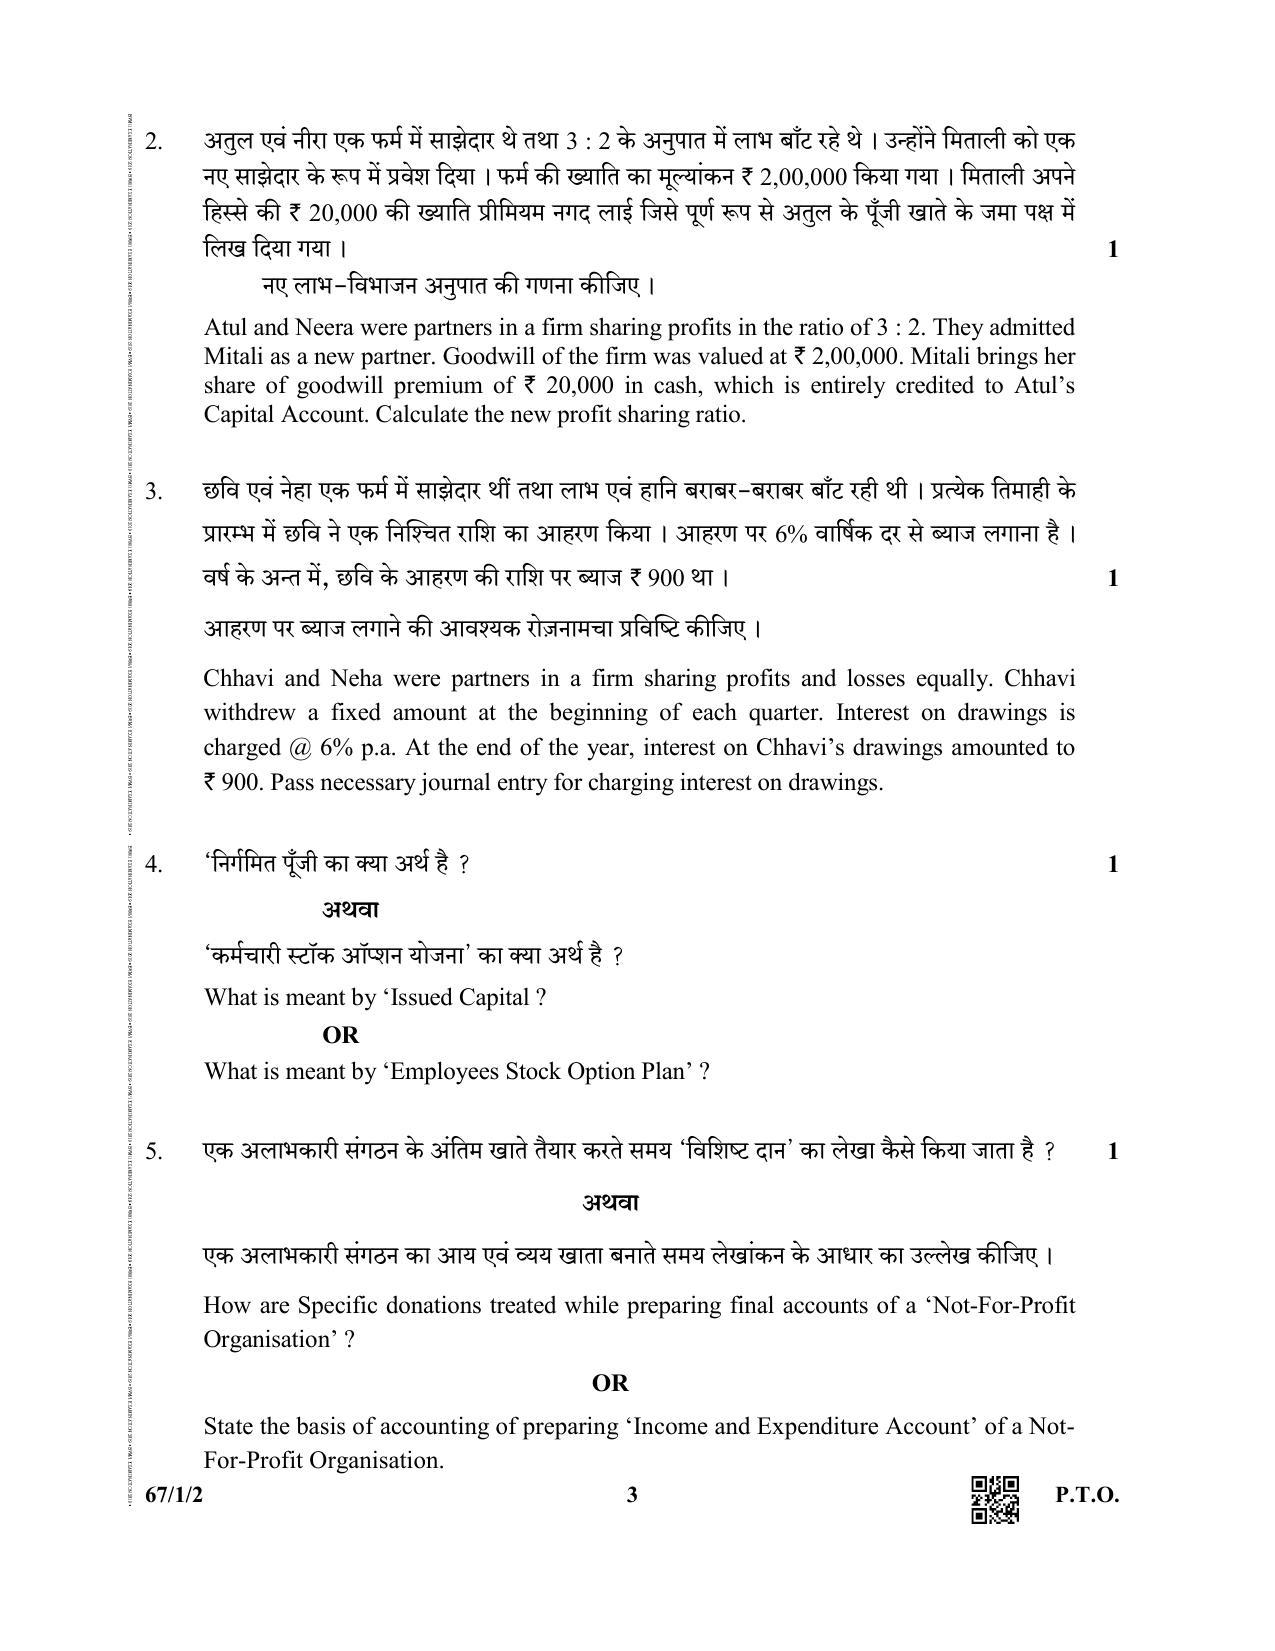 CBSE Class 12 67-1-2  (Accountancy) 2019 Question Paper - Page 3